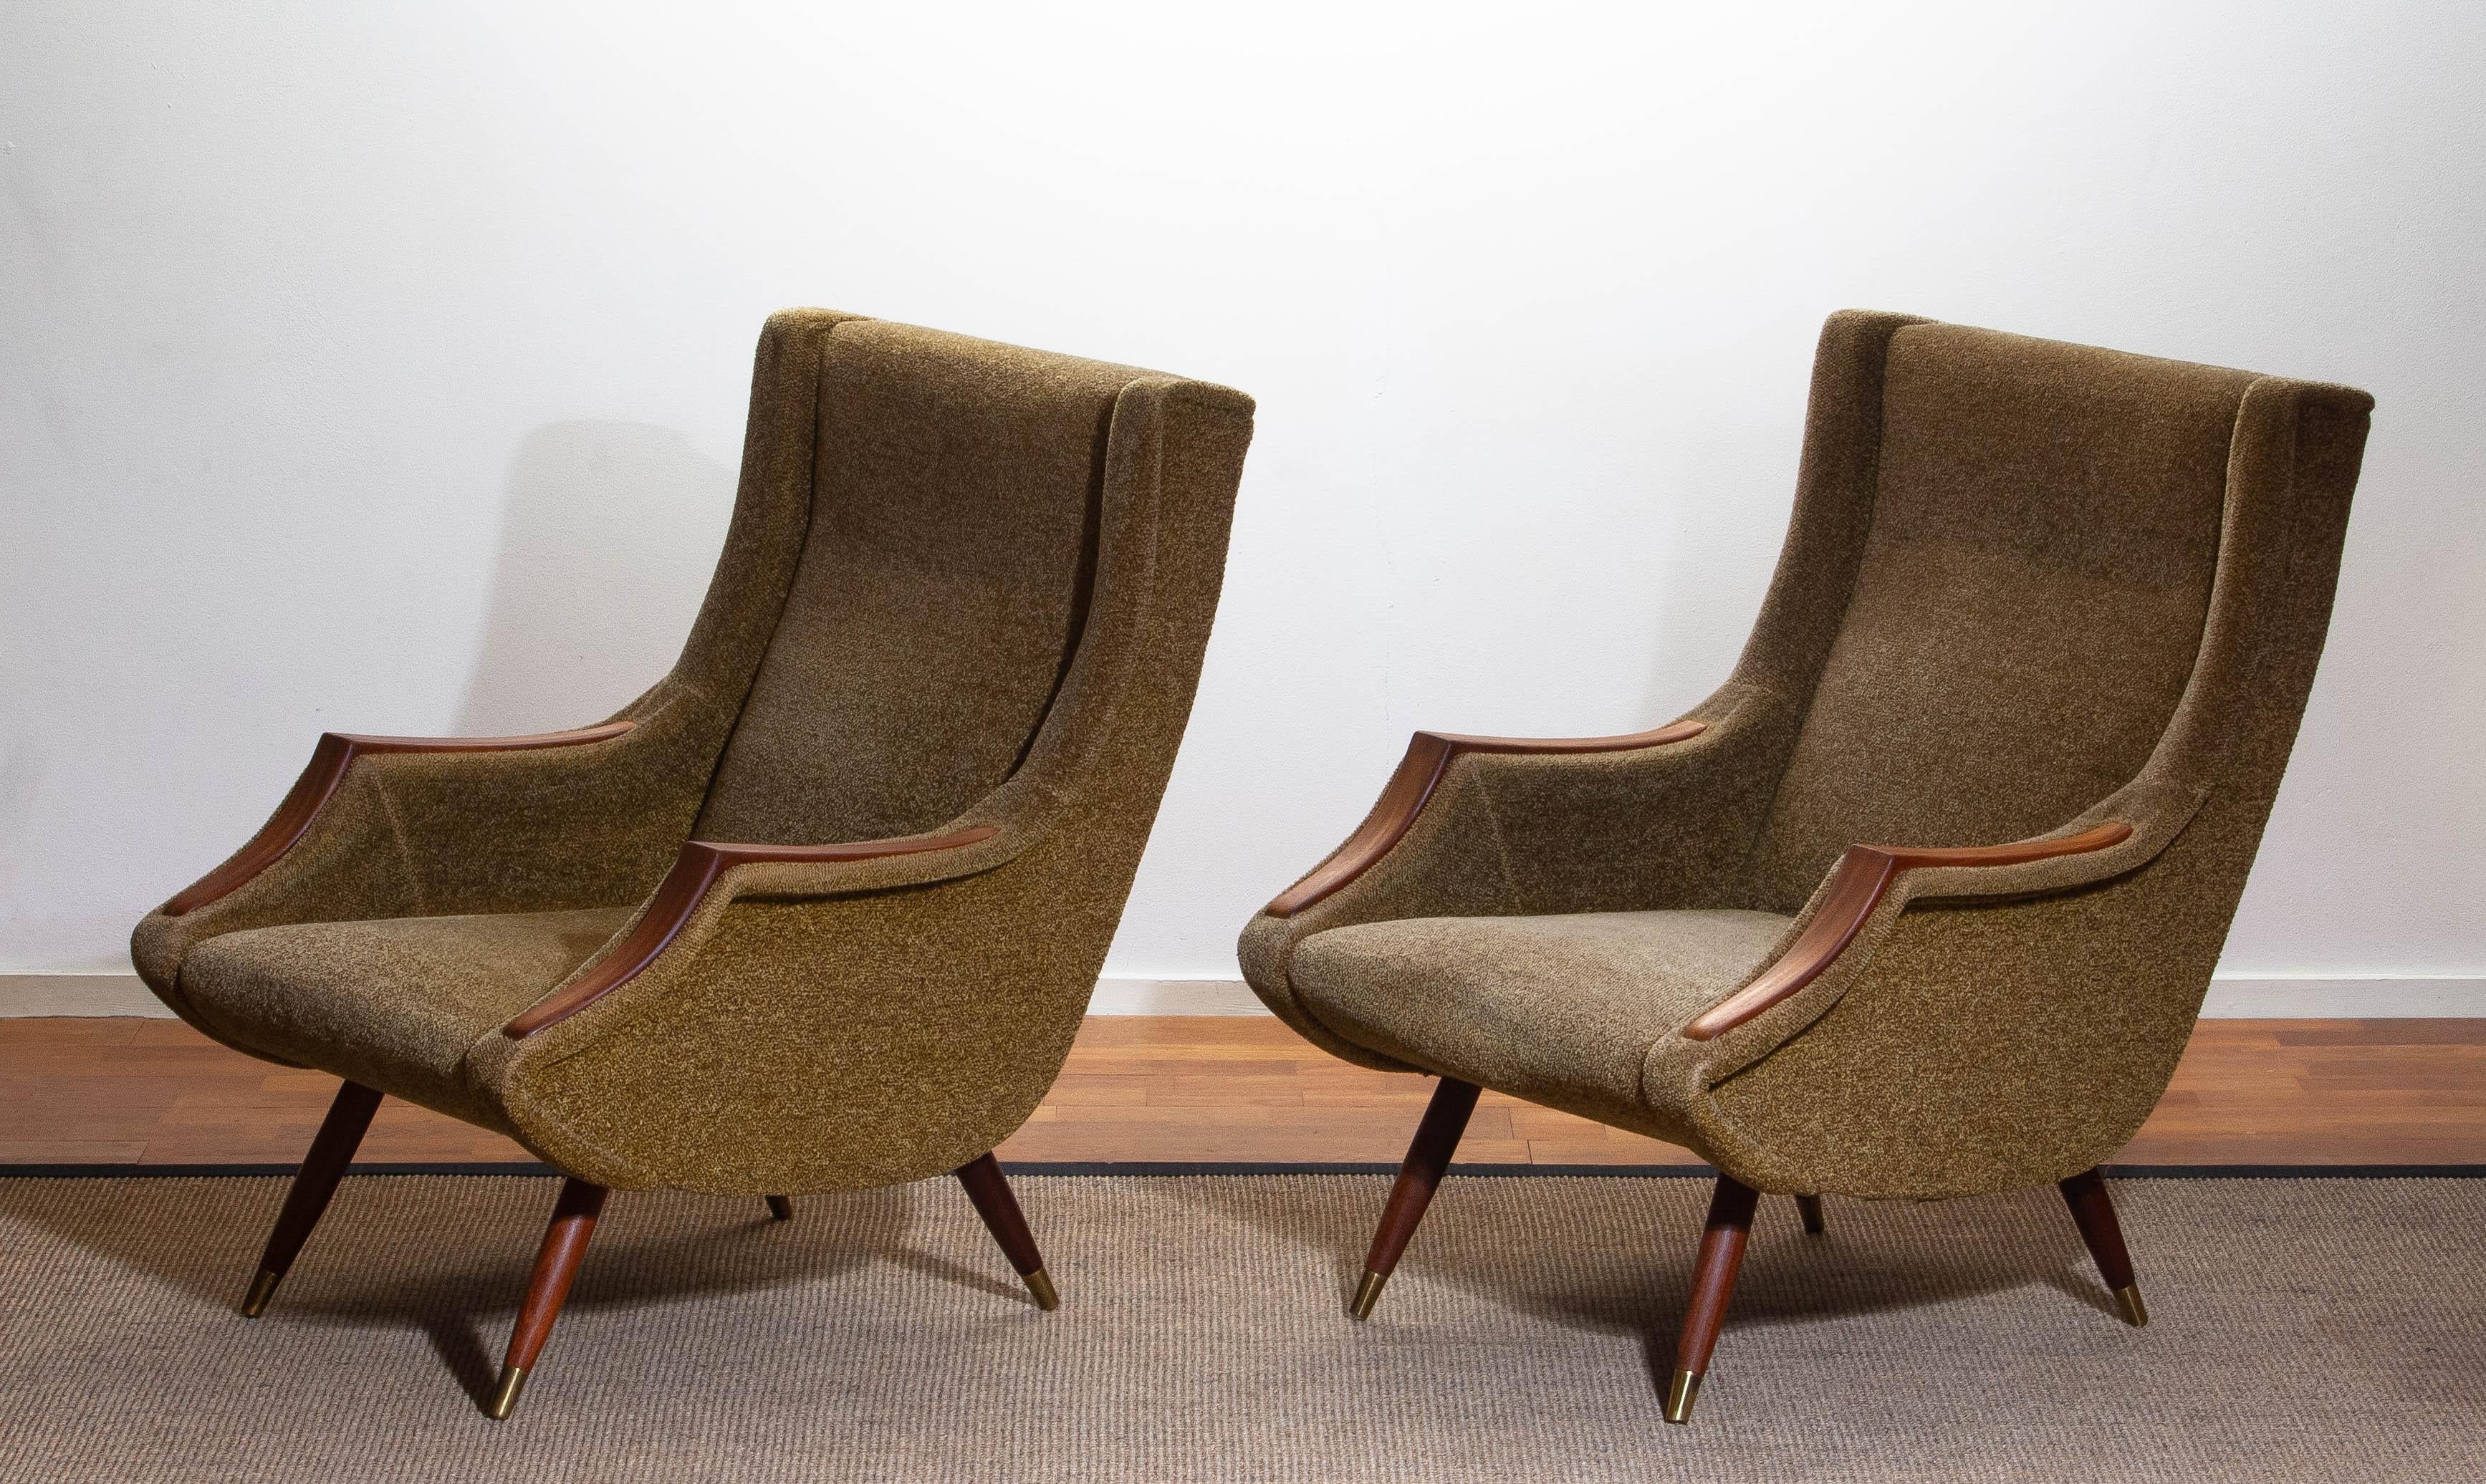 Fabric 1950s, Set of Lounge Easy Club Chairs by Aldo Morbelli for Isa Bergamo, Italy